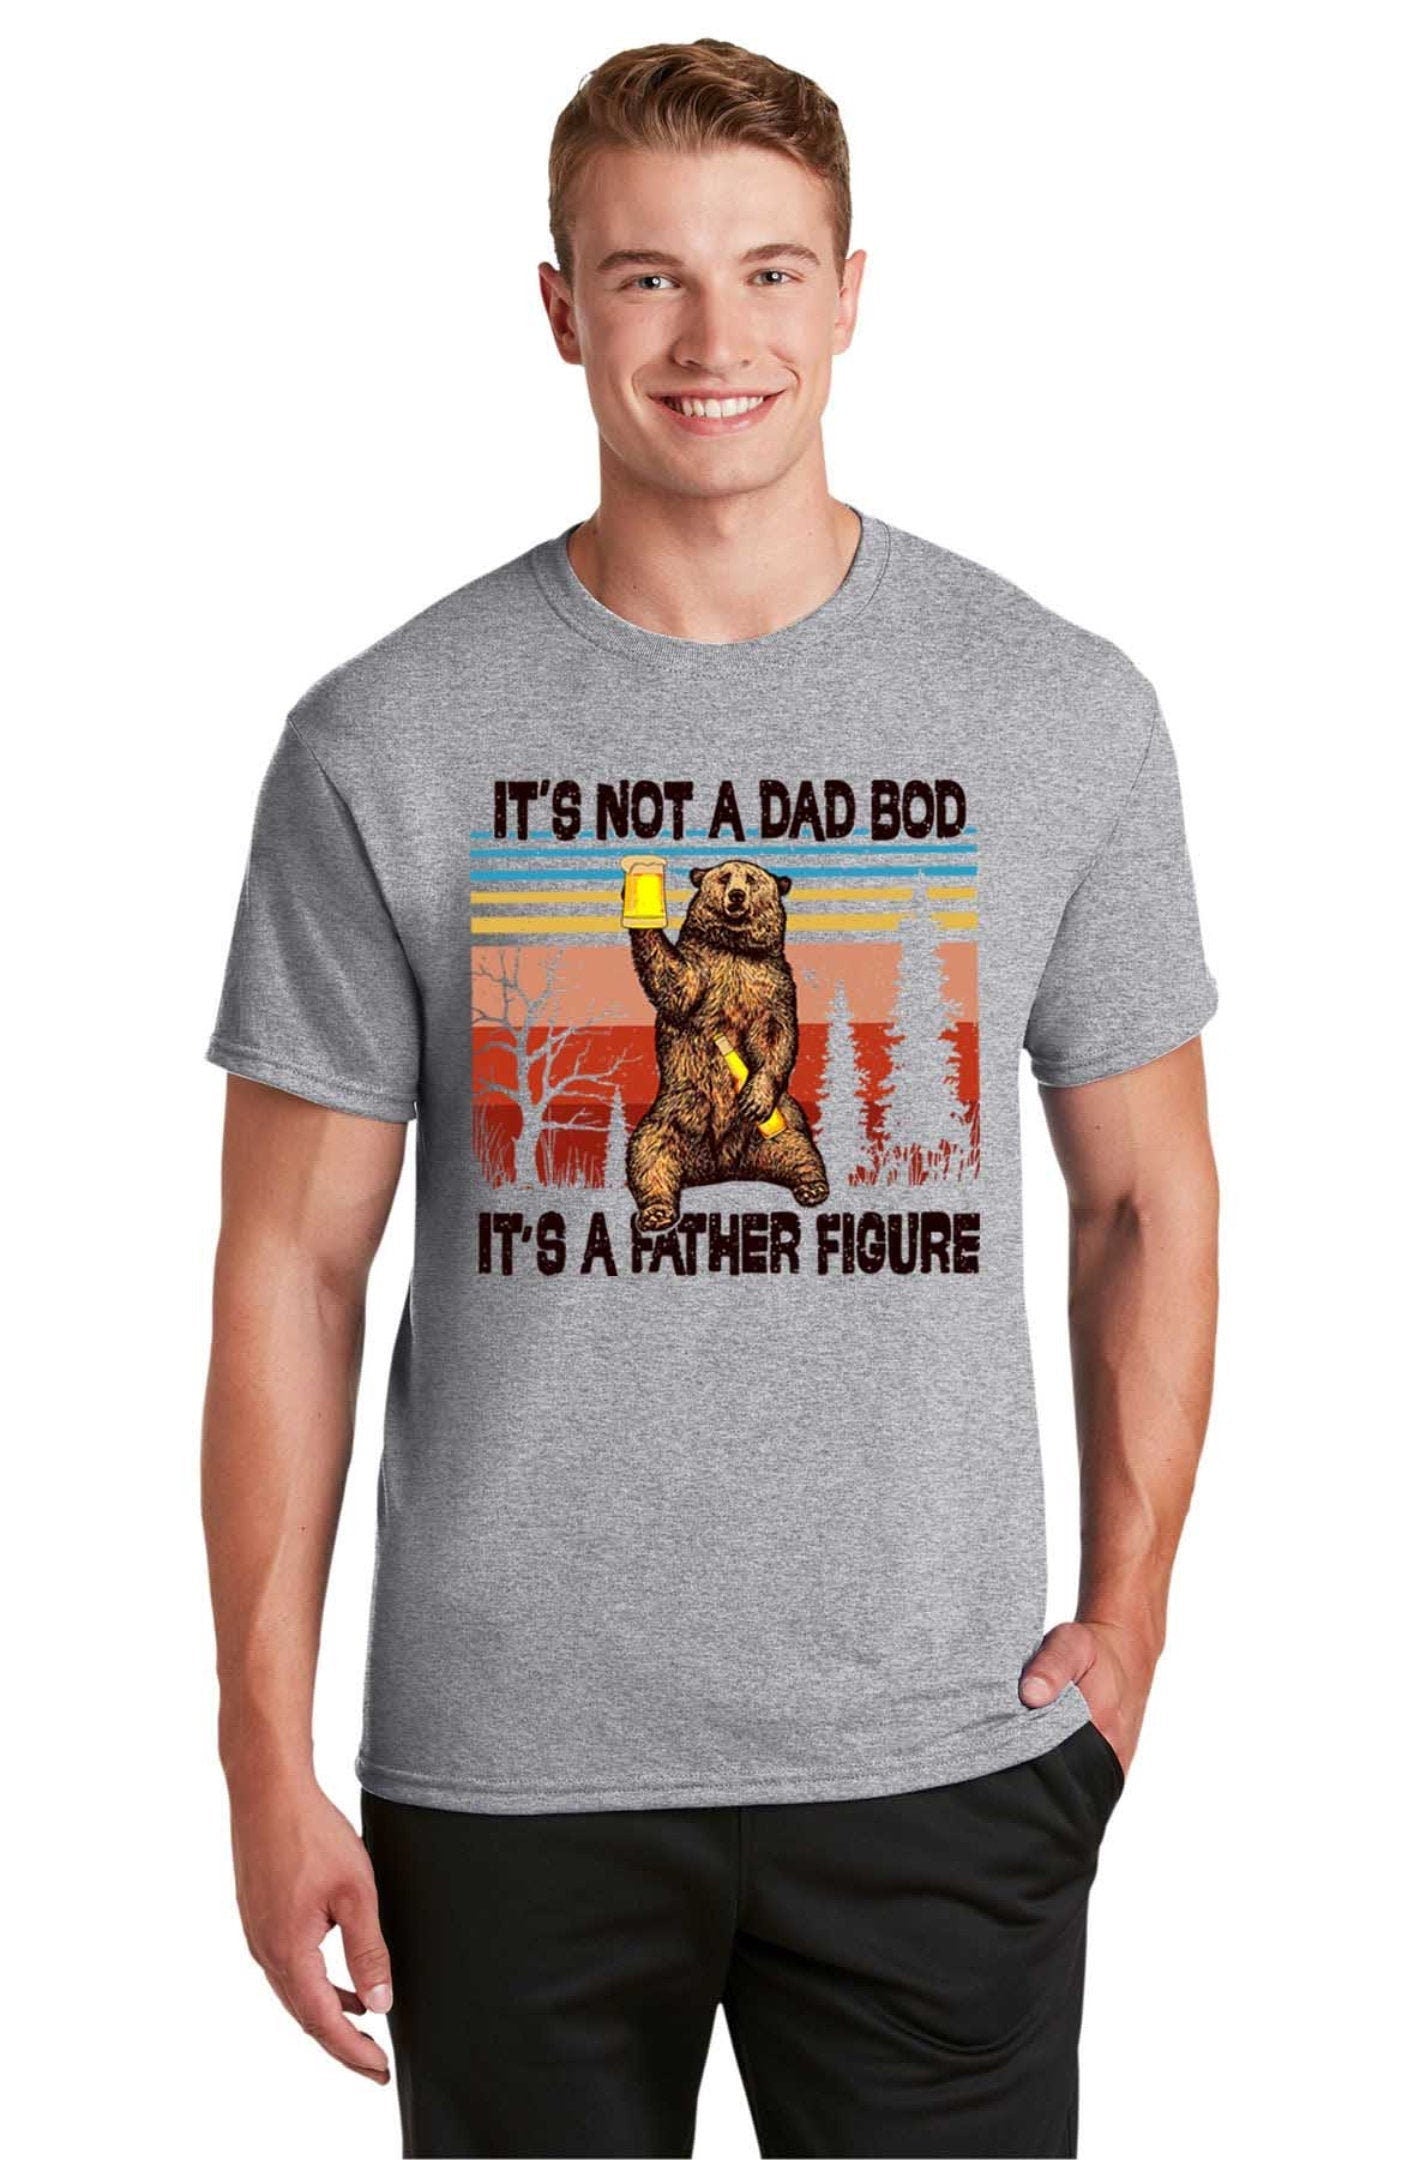 It’s Not A Dad Bod It’s A Father Figure Shirt / Funny Dad Bod Shirt / Fathers Day Gift / Funny Dad Tee